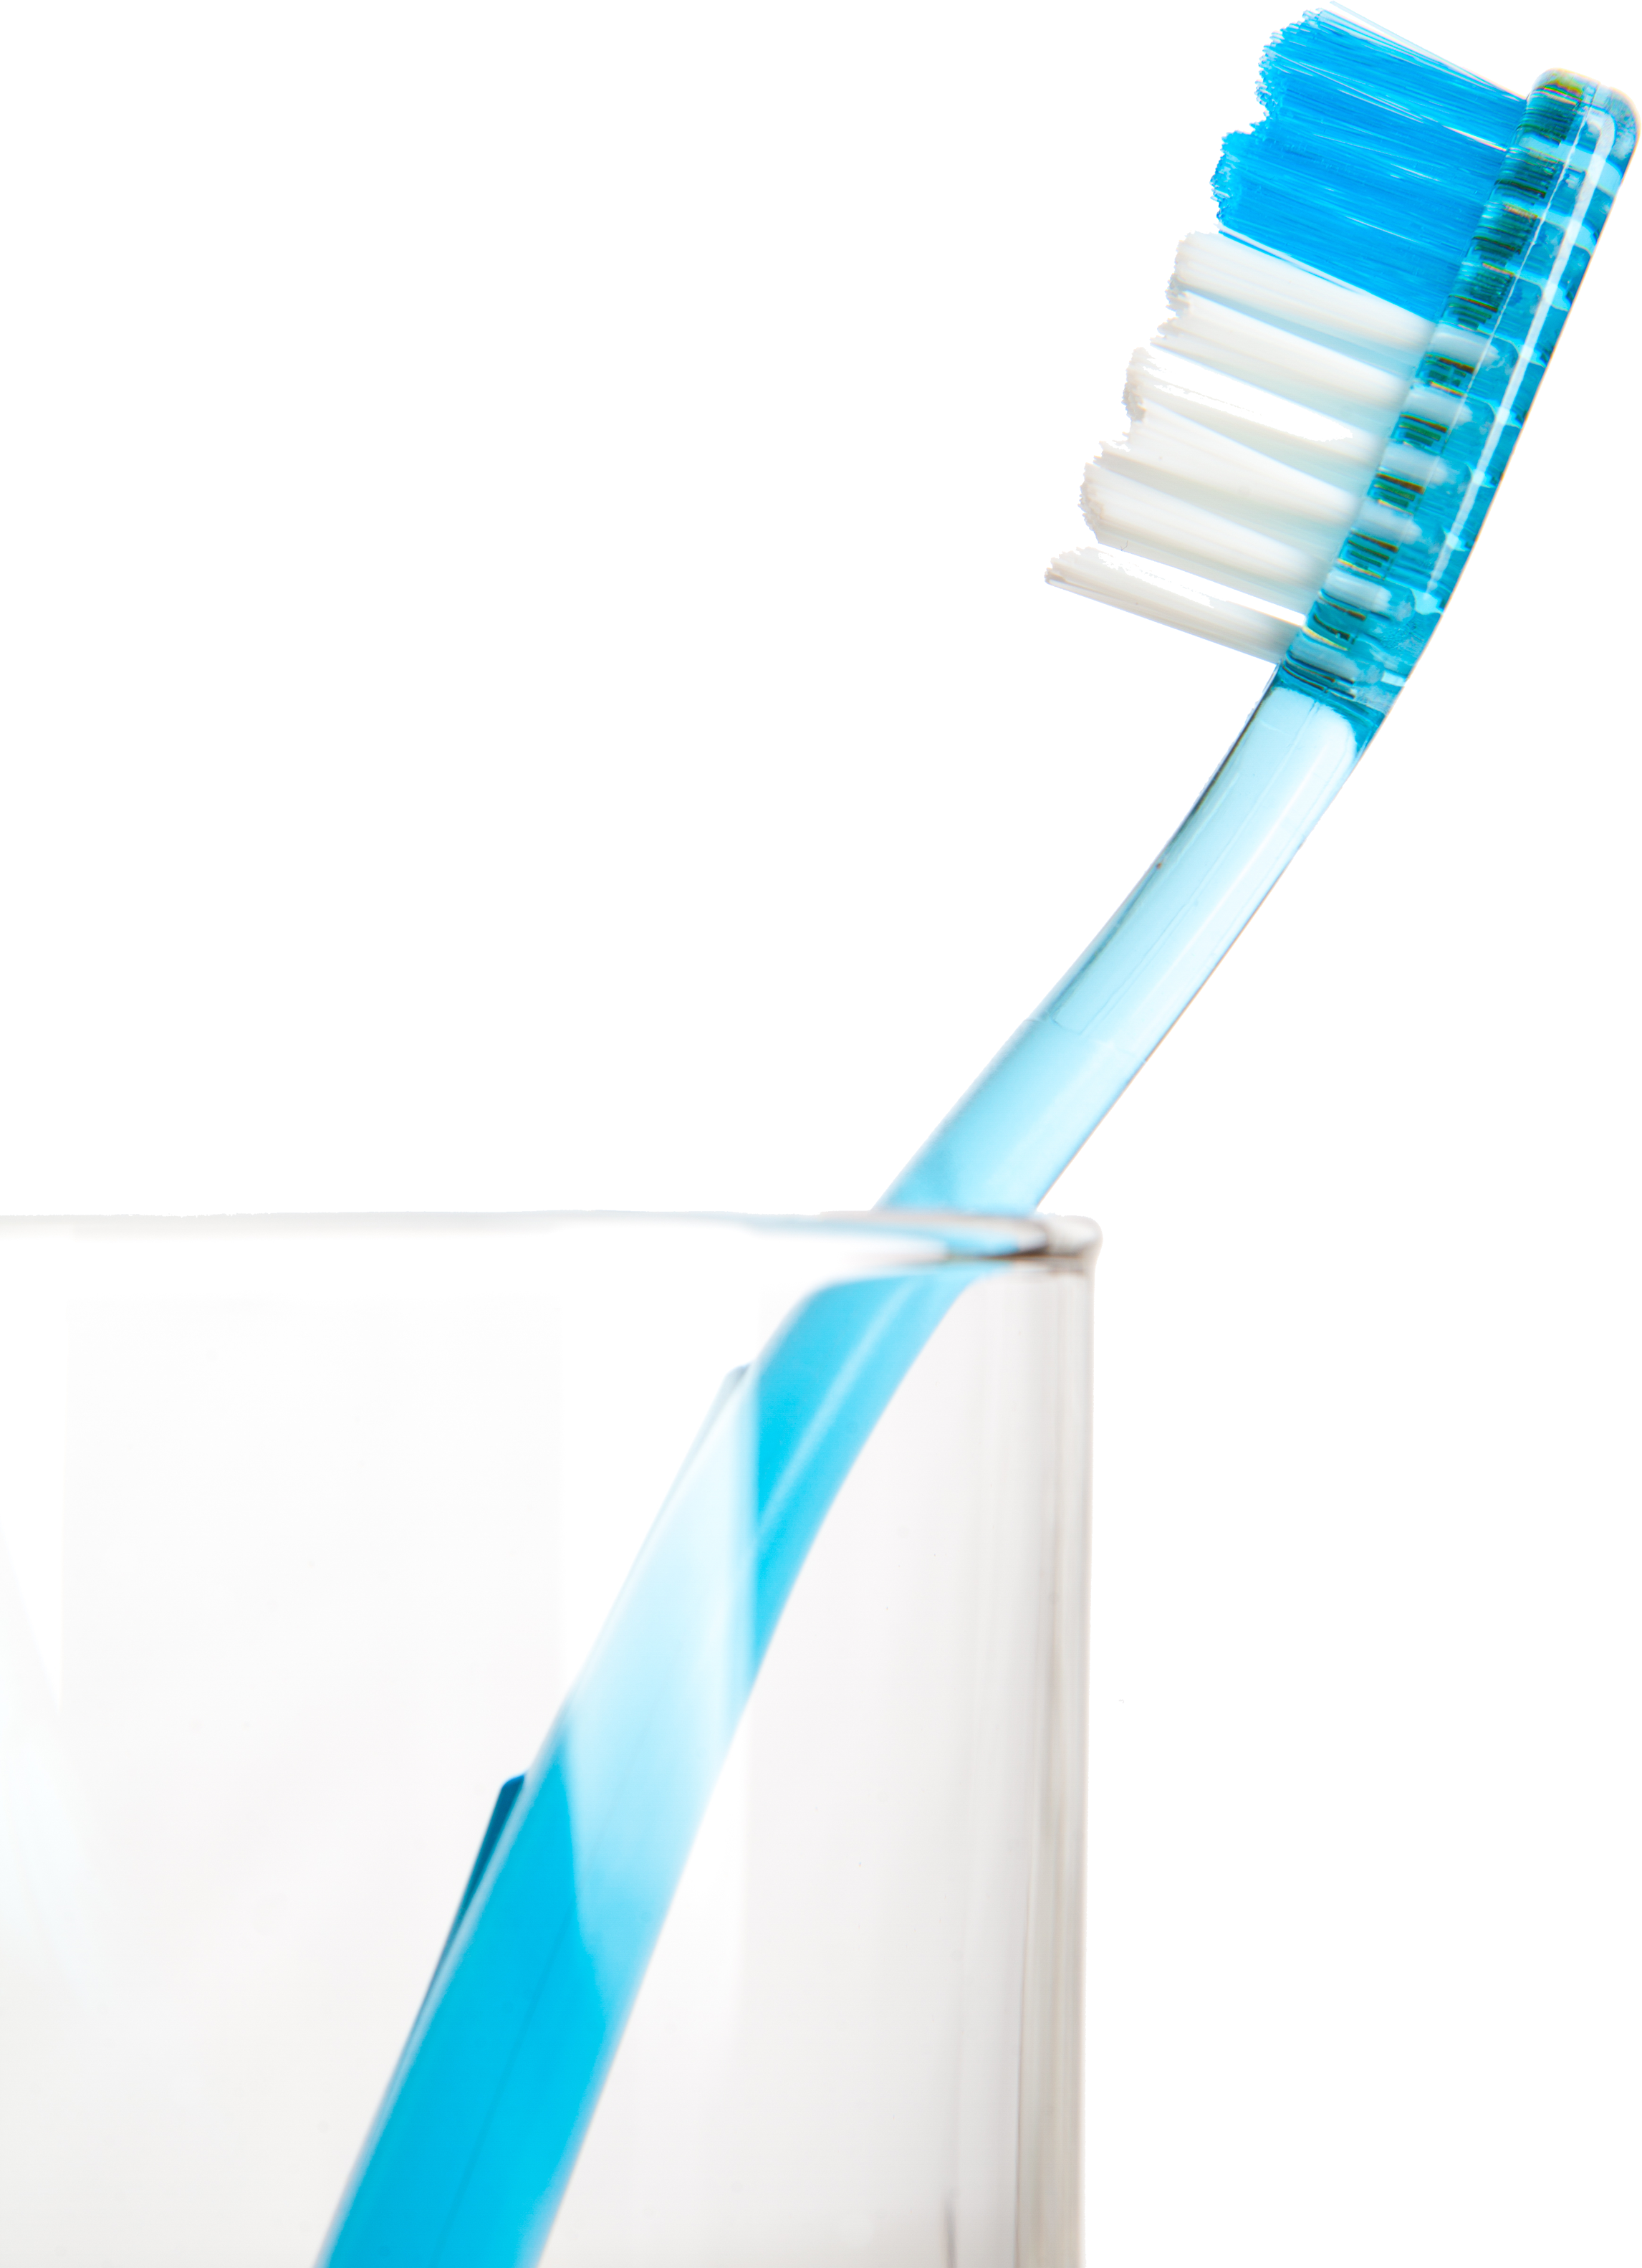 Toothbrush PNG image with transparent background.